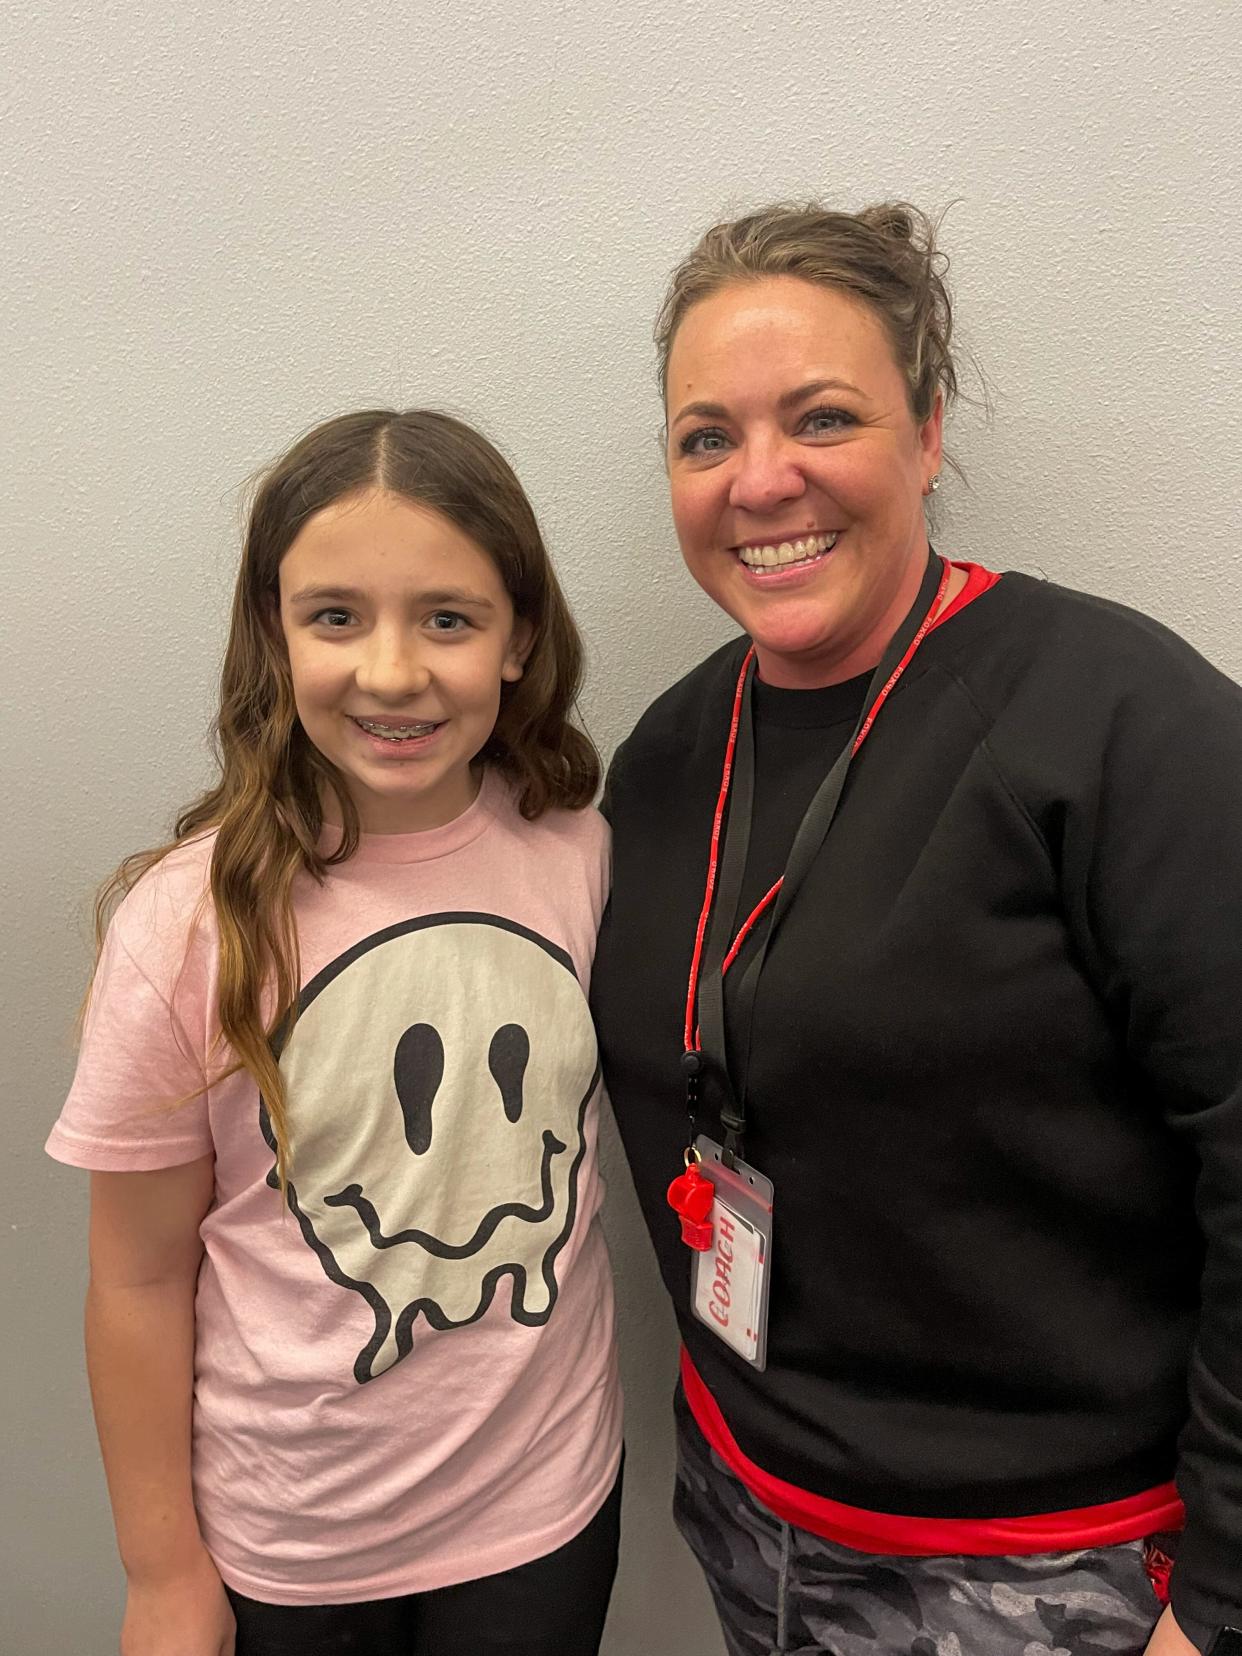 Ashlee Juarez of Lubbock-Cooper Middle School (LCISD) was named as a Teacher on the Rise for February 2023.